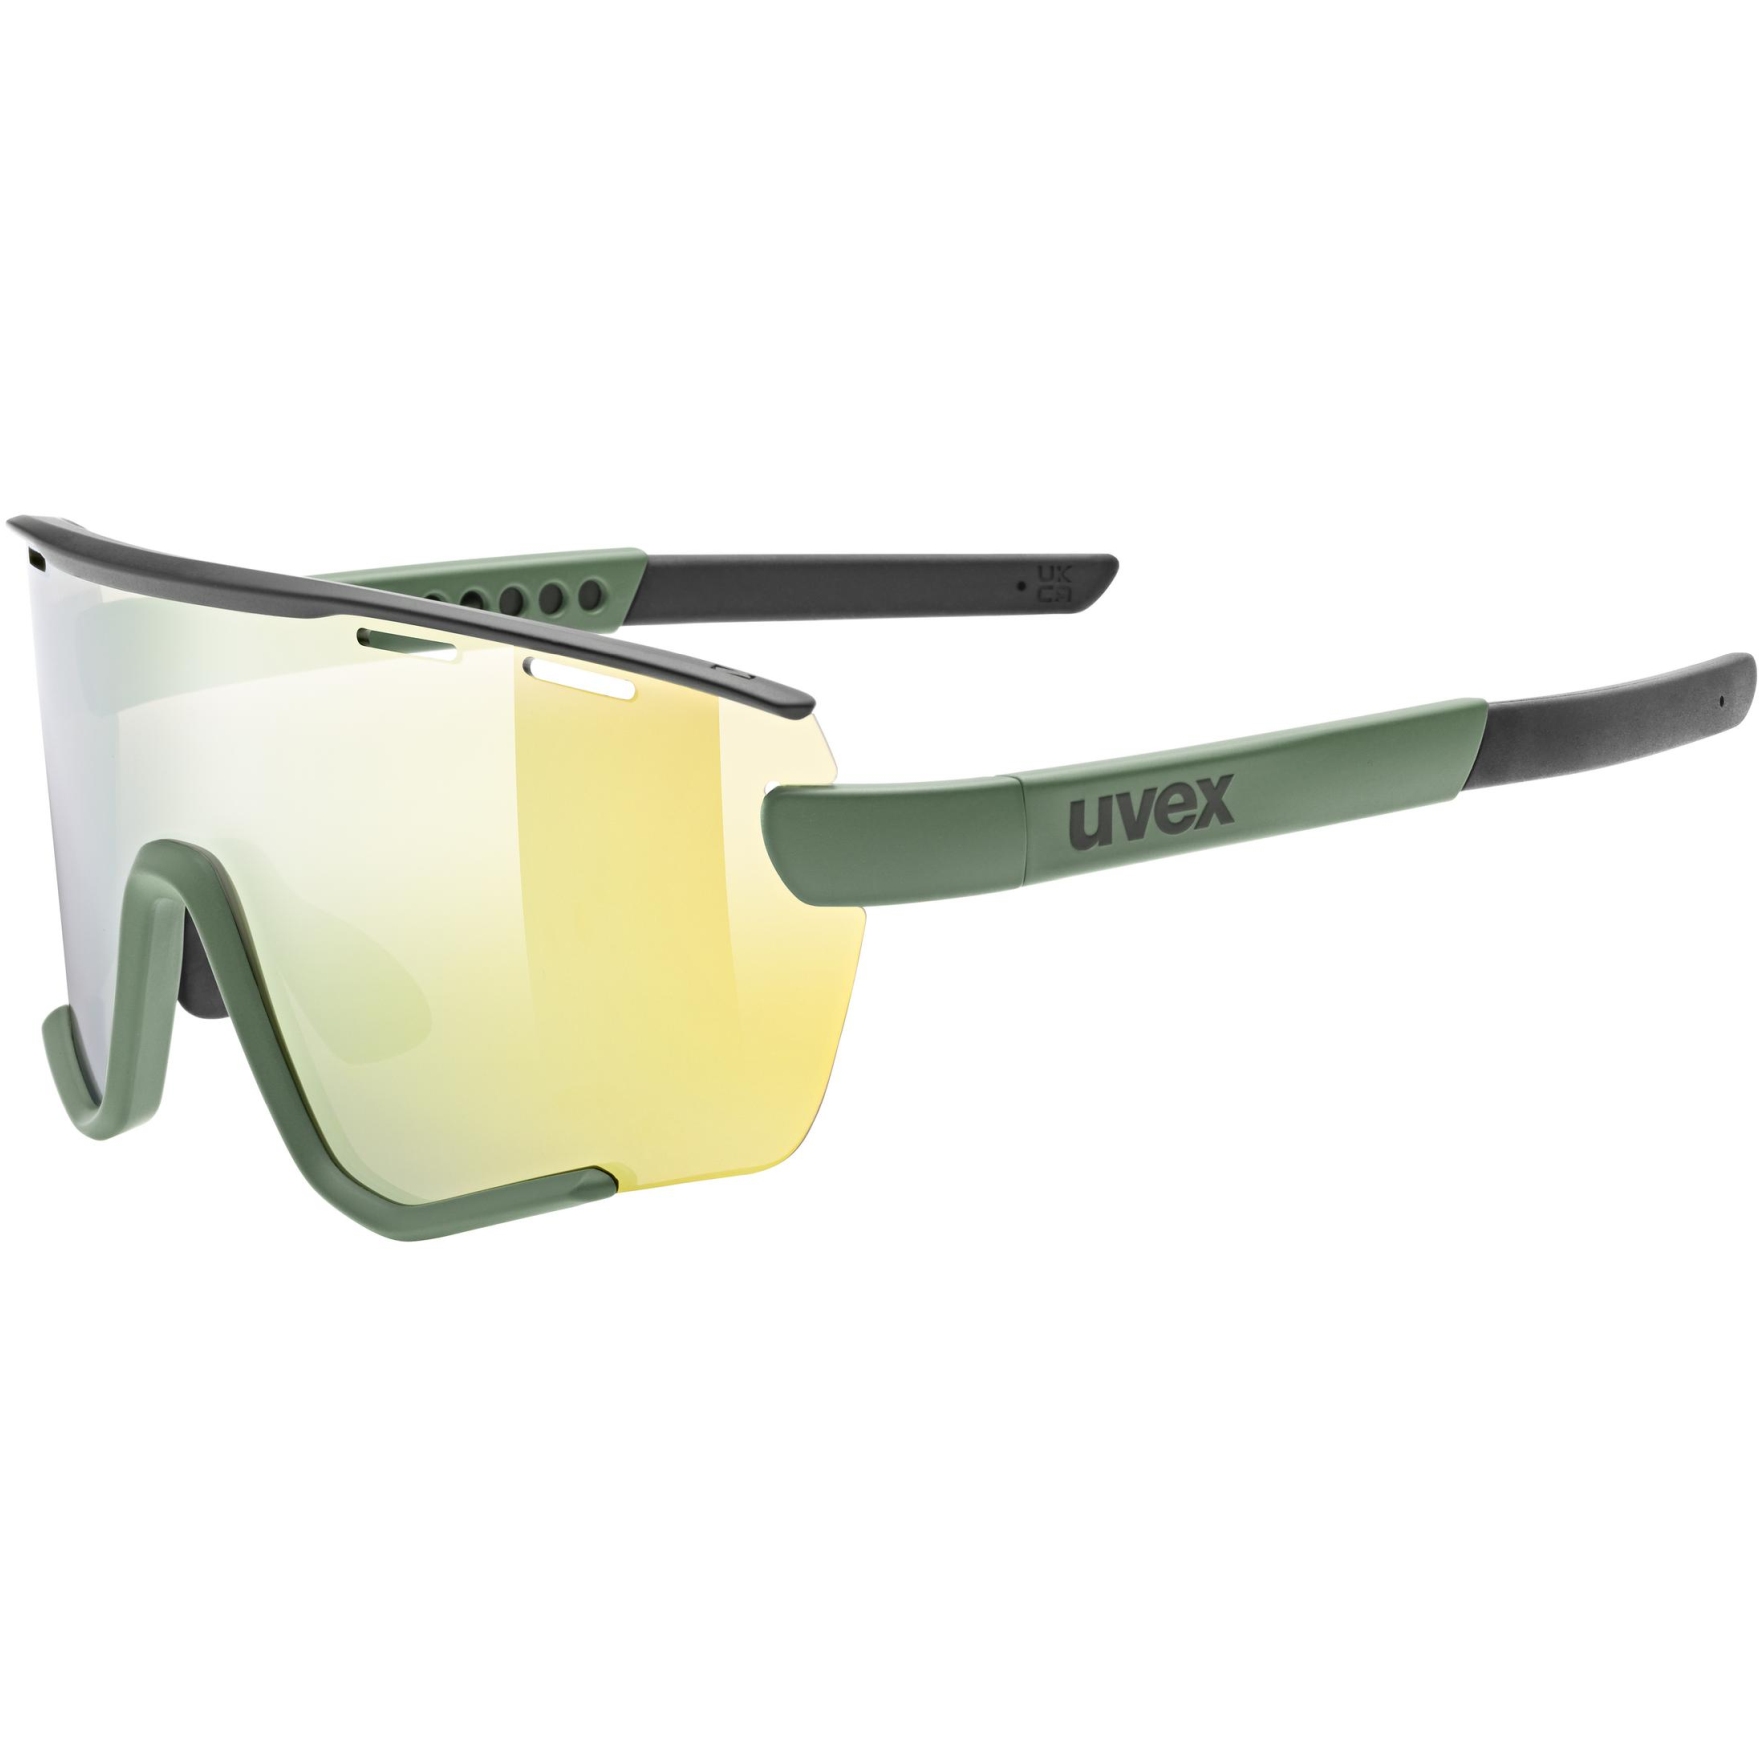 Picture of Uvex sportstyle 236 Glasses Set - moss green-black matt/supravision mirror yellow + clear